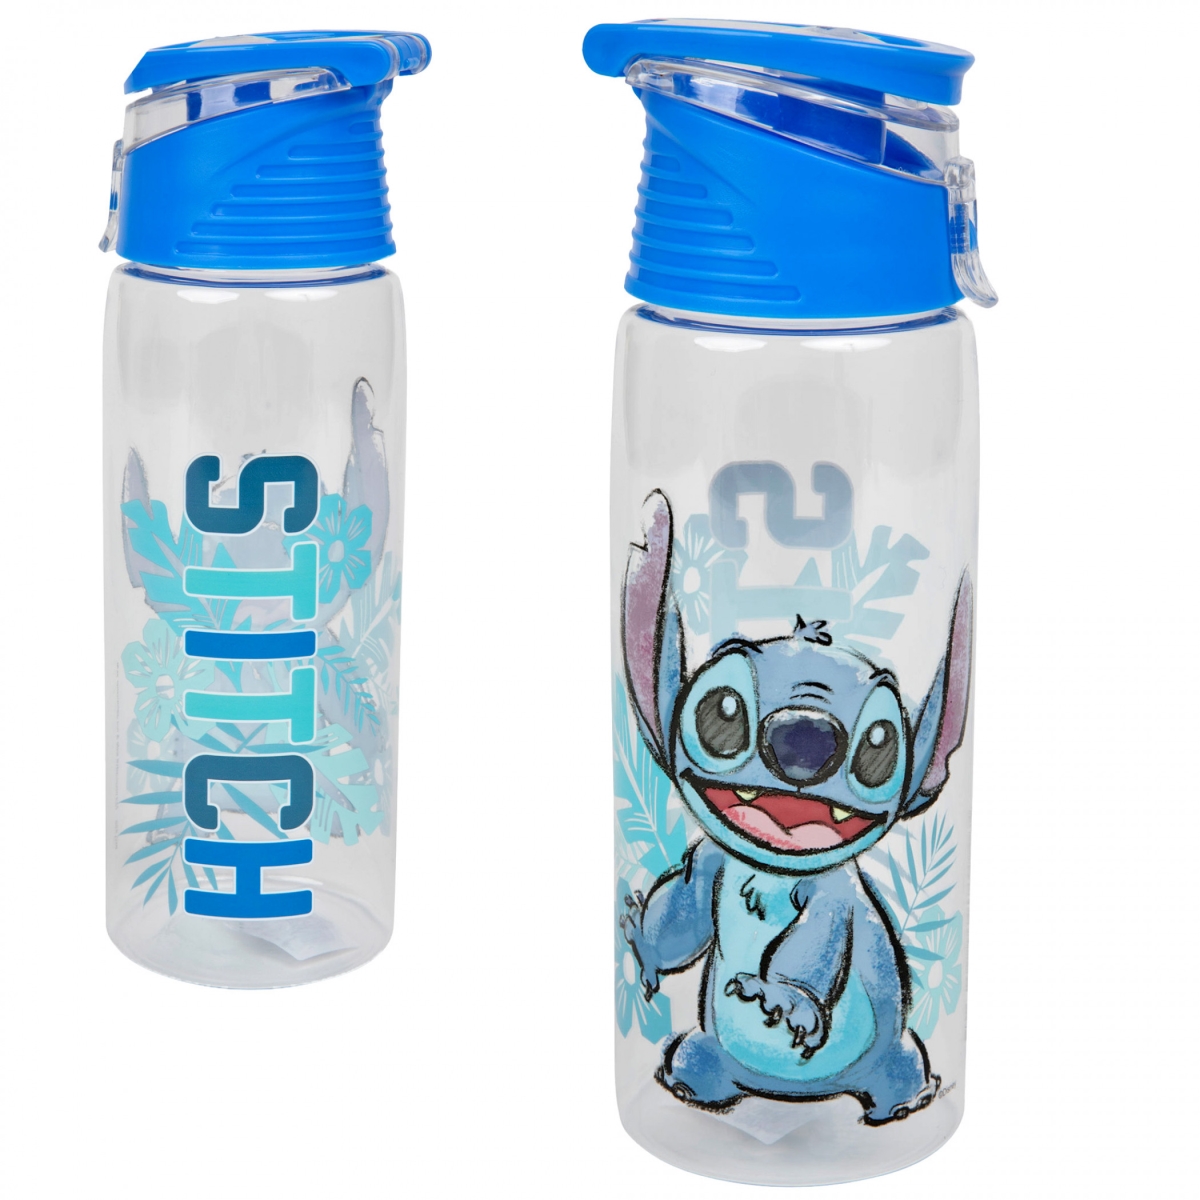 Picture of Lilo & Stitch 847118 Disney Stitch Character Flip-Top Water Bottle